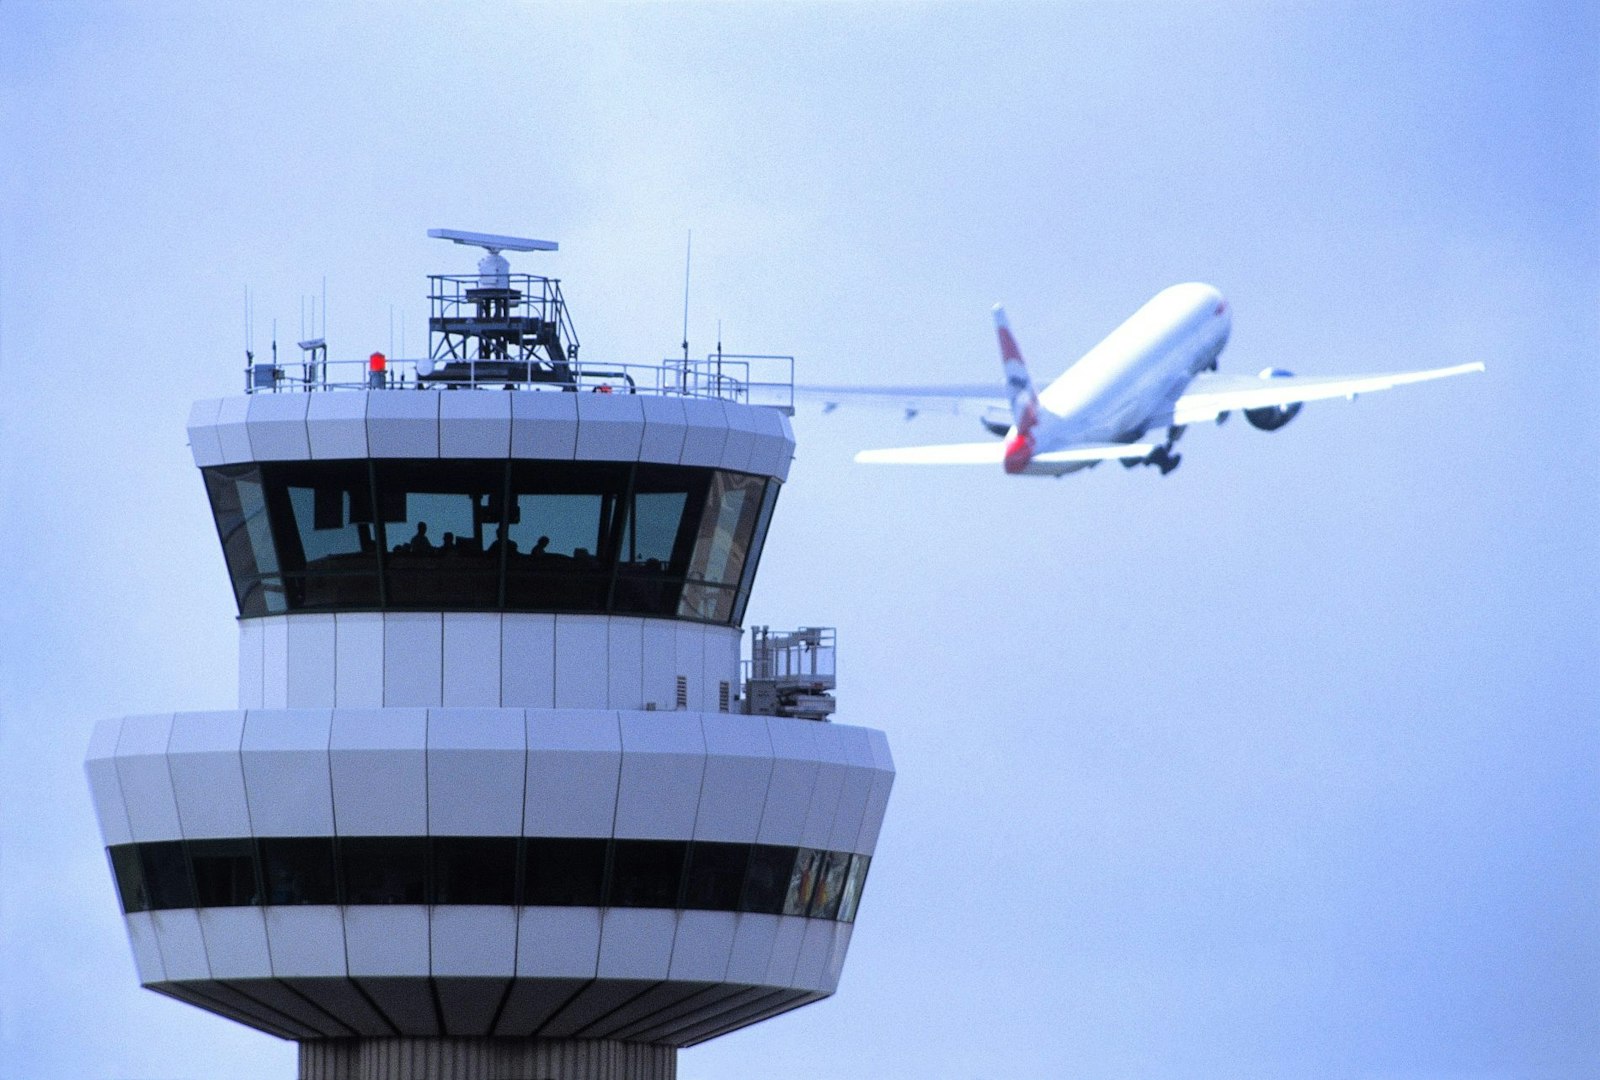 Gatwick-picture-control-tower-with-aircraft-1900x1283 0